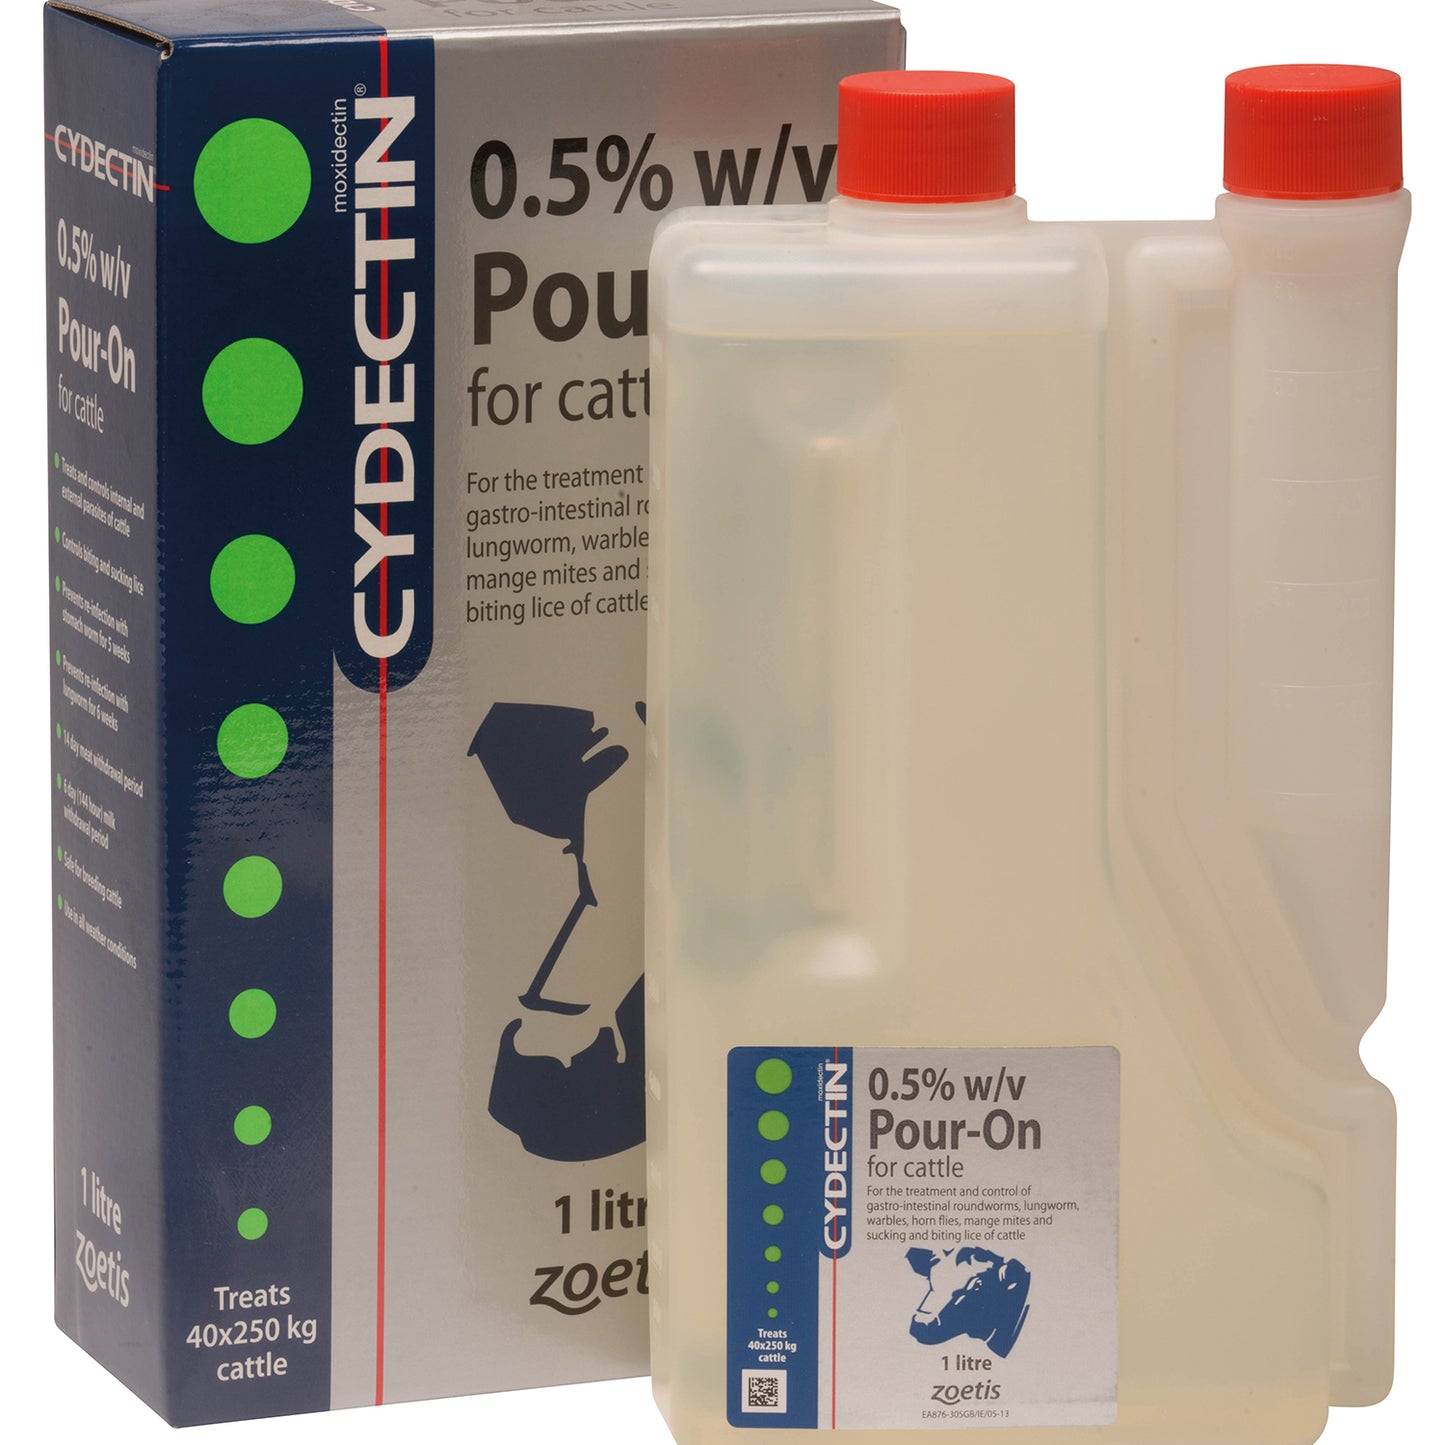 Cydectin 0.5% w/v Pour-On for Cattle